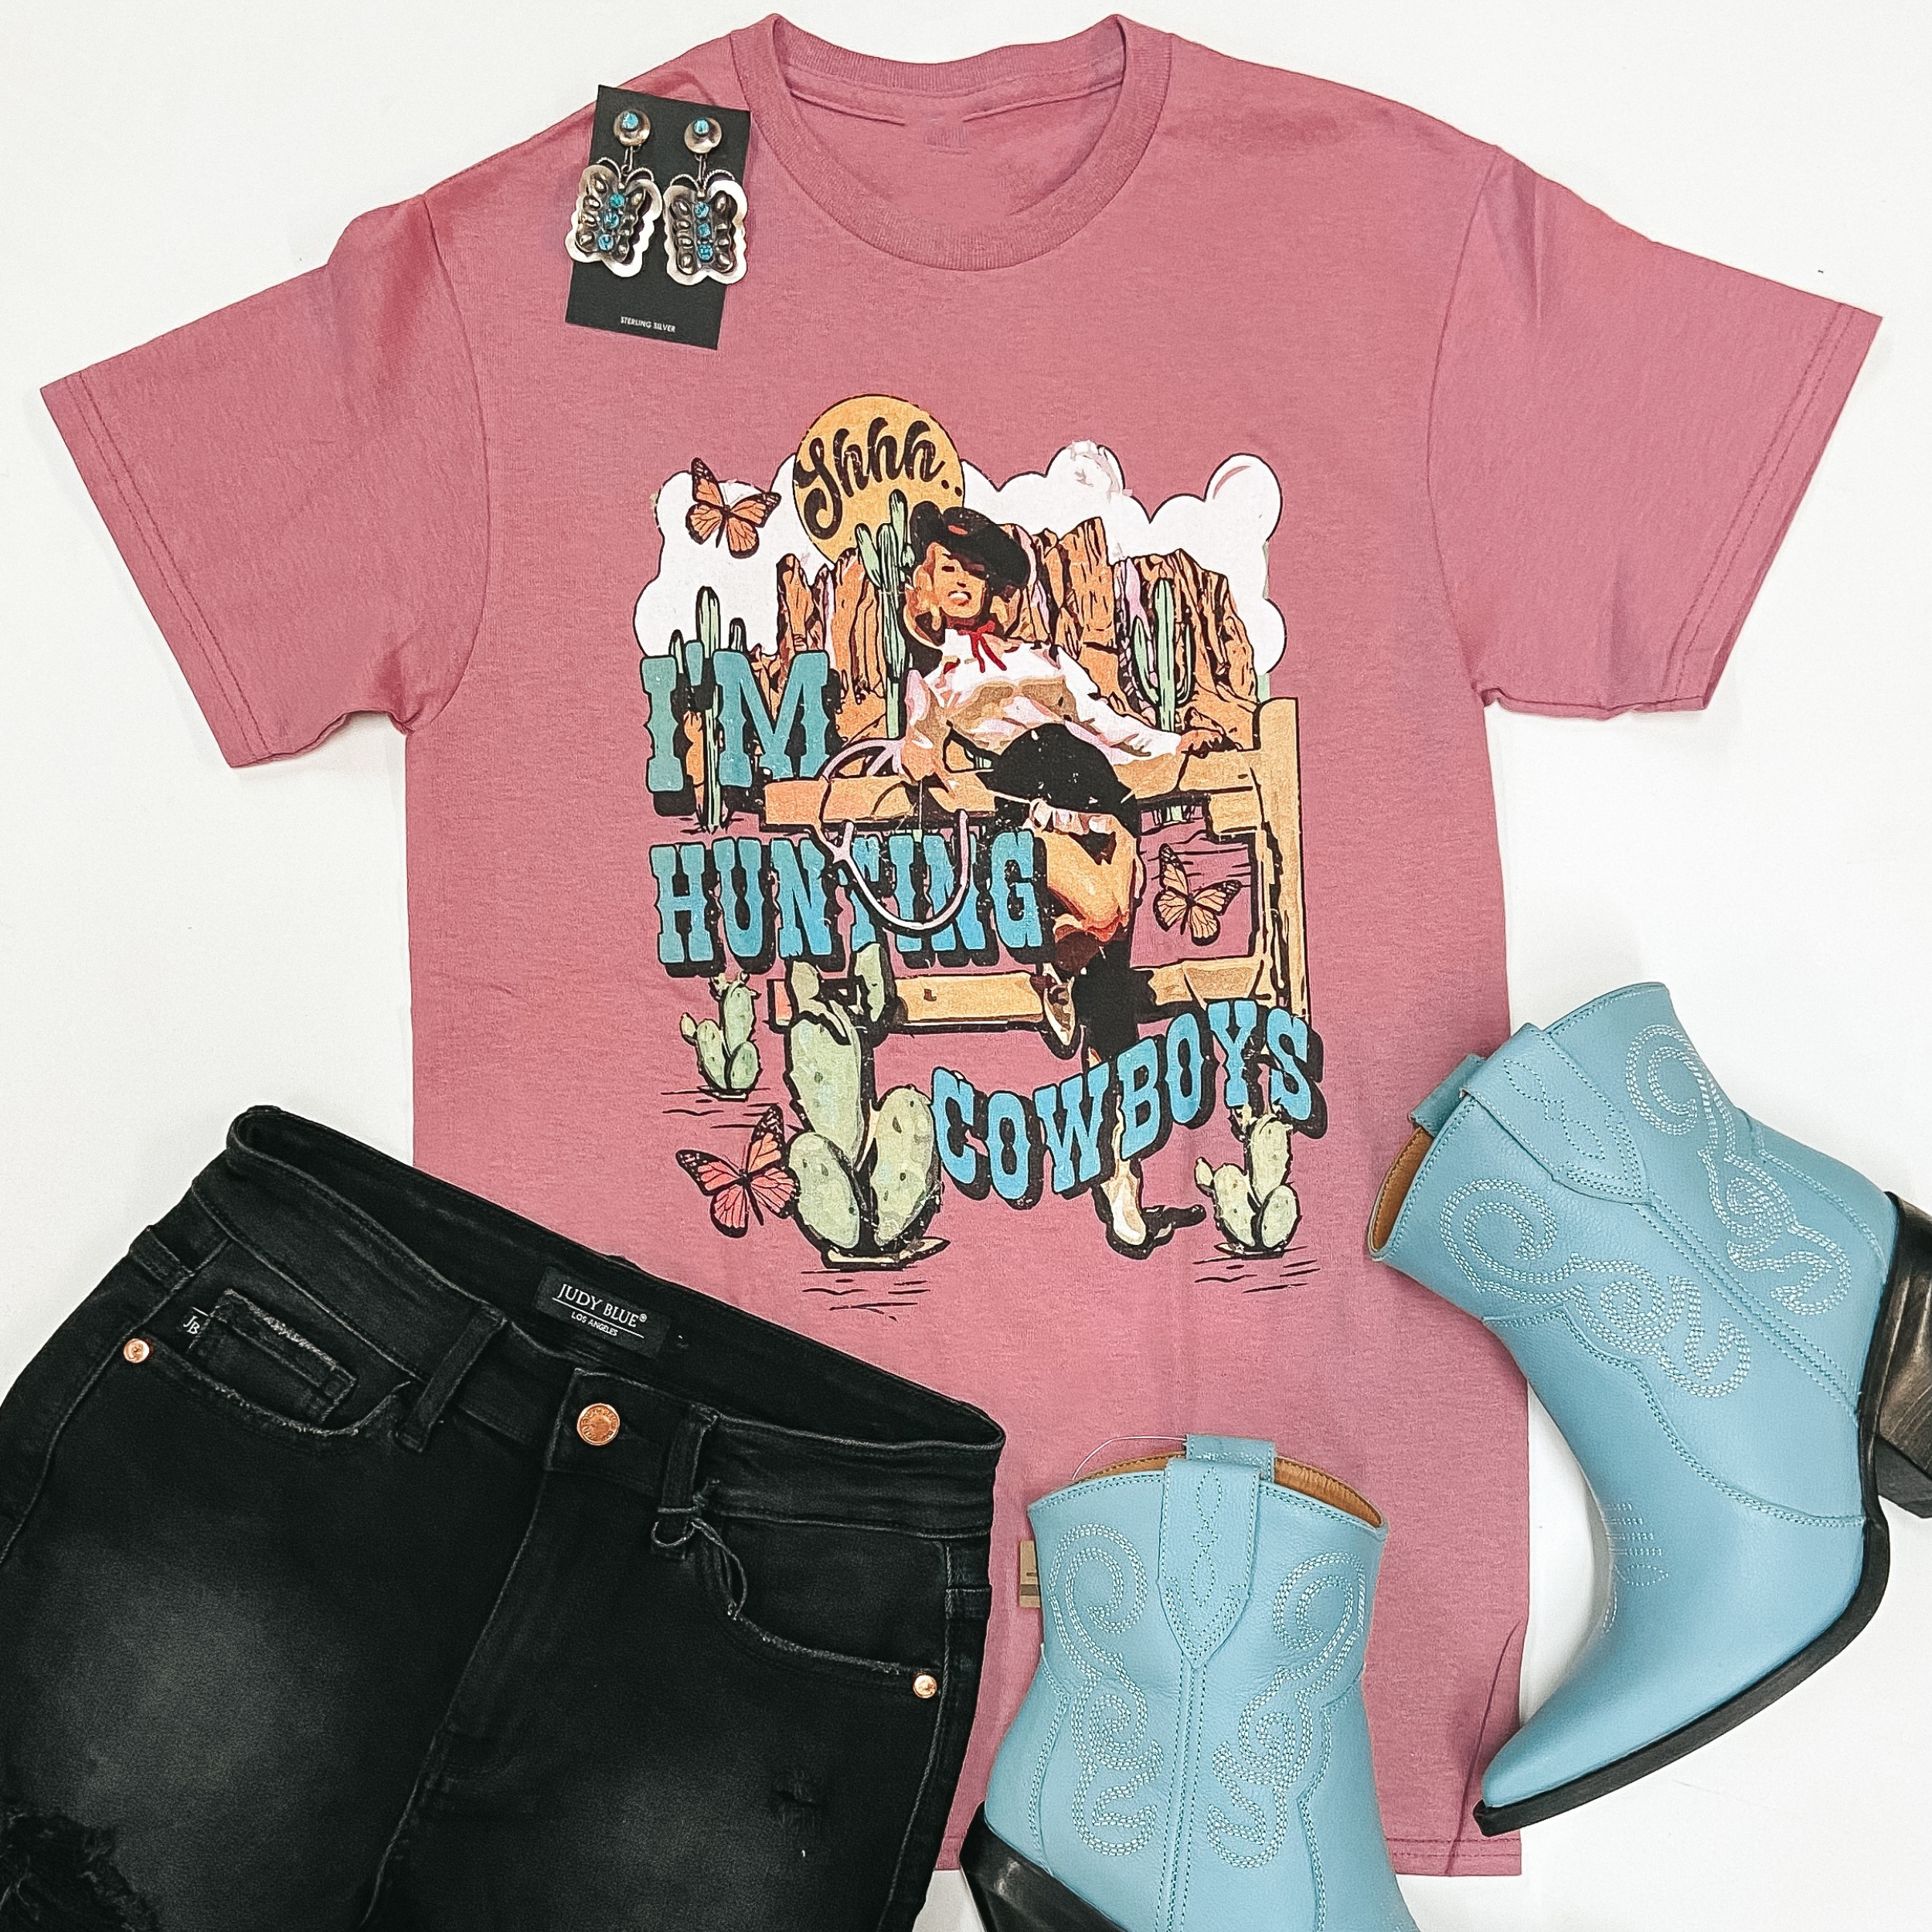 A mauve pink graphic tee is pictured on a white background. This short sleeve tee shirt has a graphic on the front center that is a pin-up cowgirl that says "Shhh.. I'm Hunting Cowboys." 